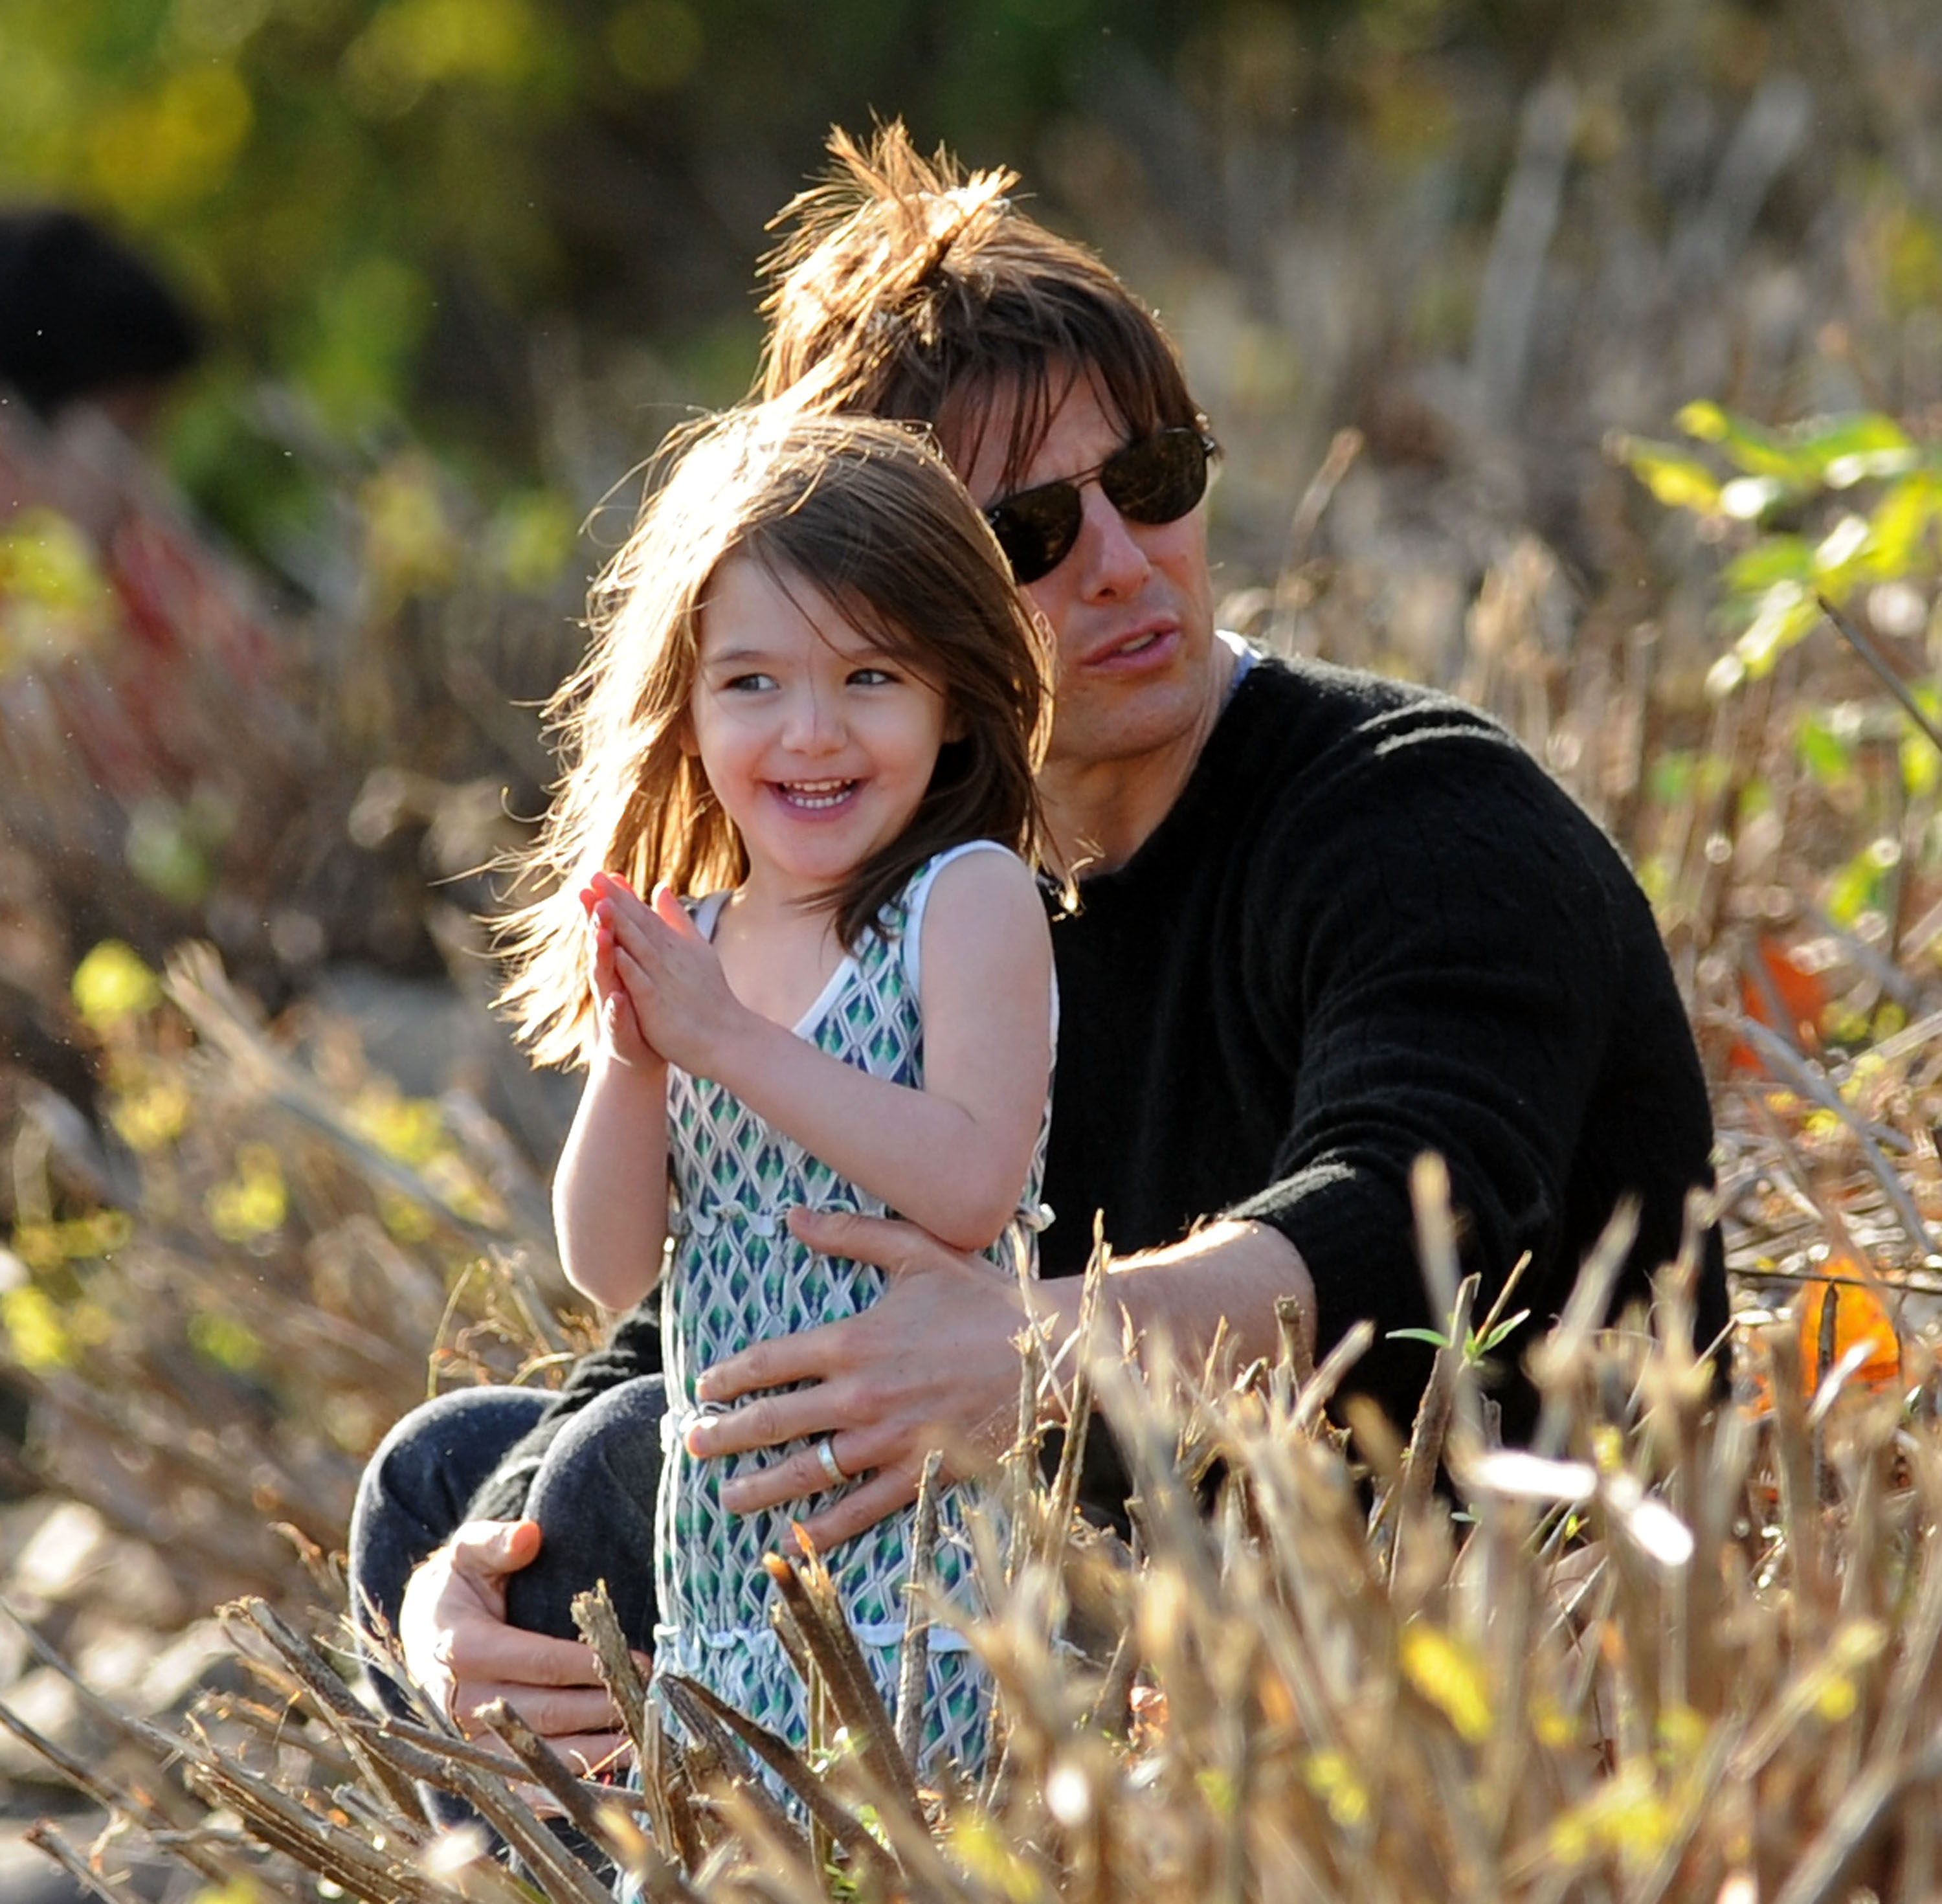 Suri Cruise and Tom Cruise visit Charles River Basin in Cambridge, Massachusetts on October 10, 2009 | Source: Getty Images